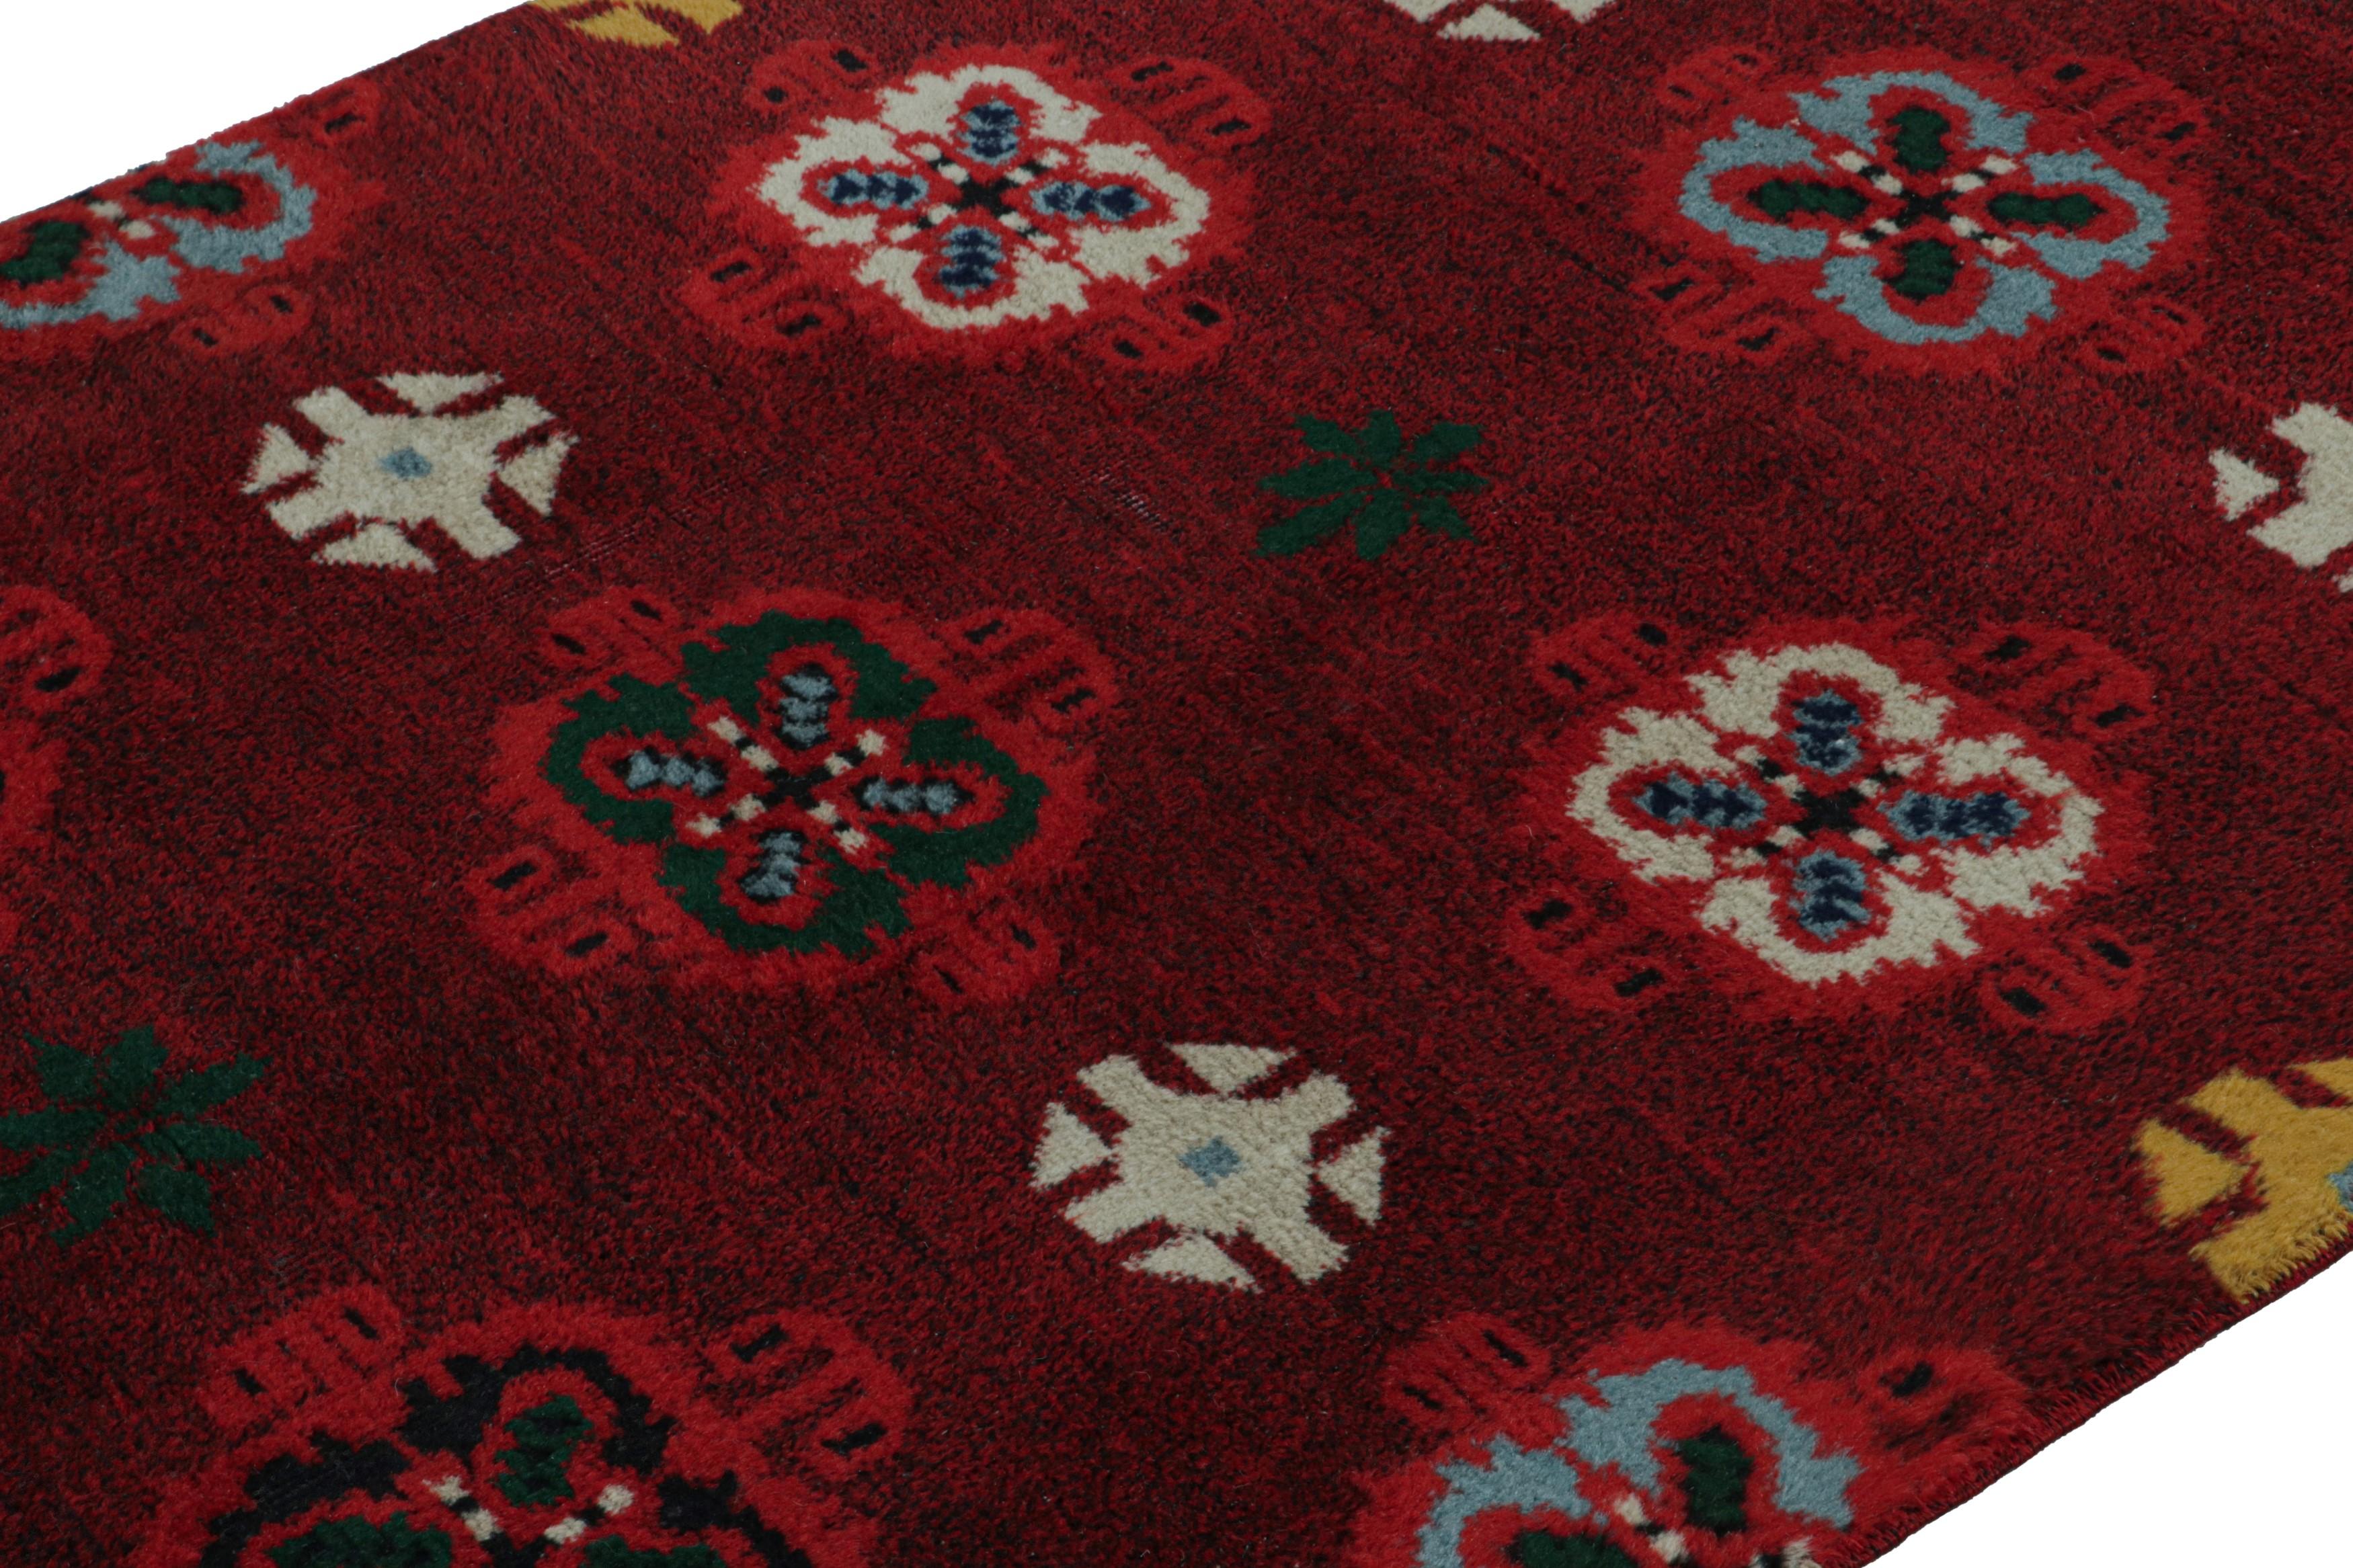 Hand-Knotted Vintage Zeki Müren Rug in Red with Geometric Patterns, from Rug & Kilim For Sale